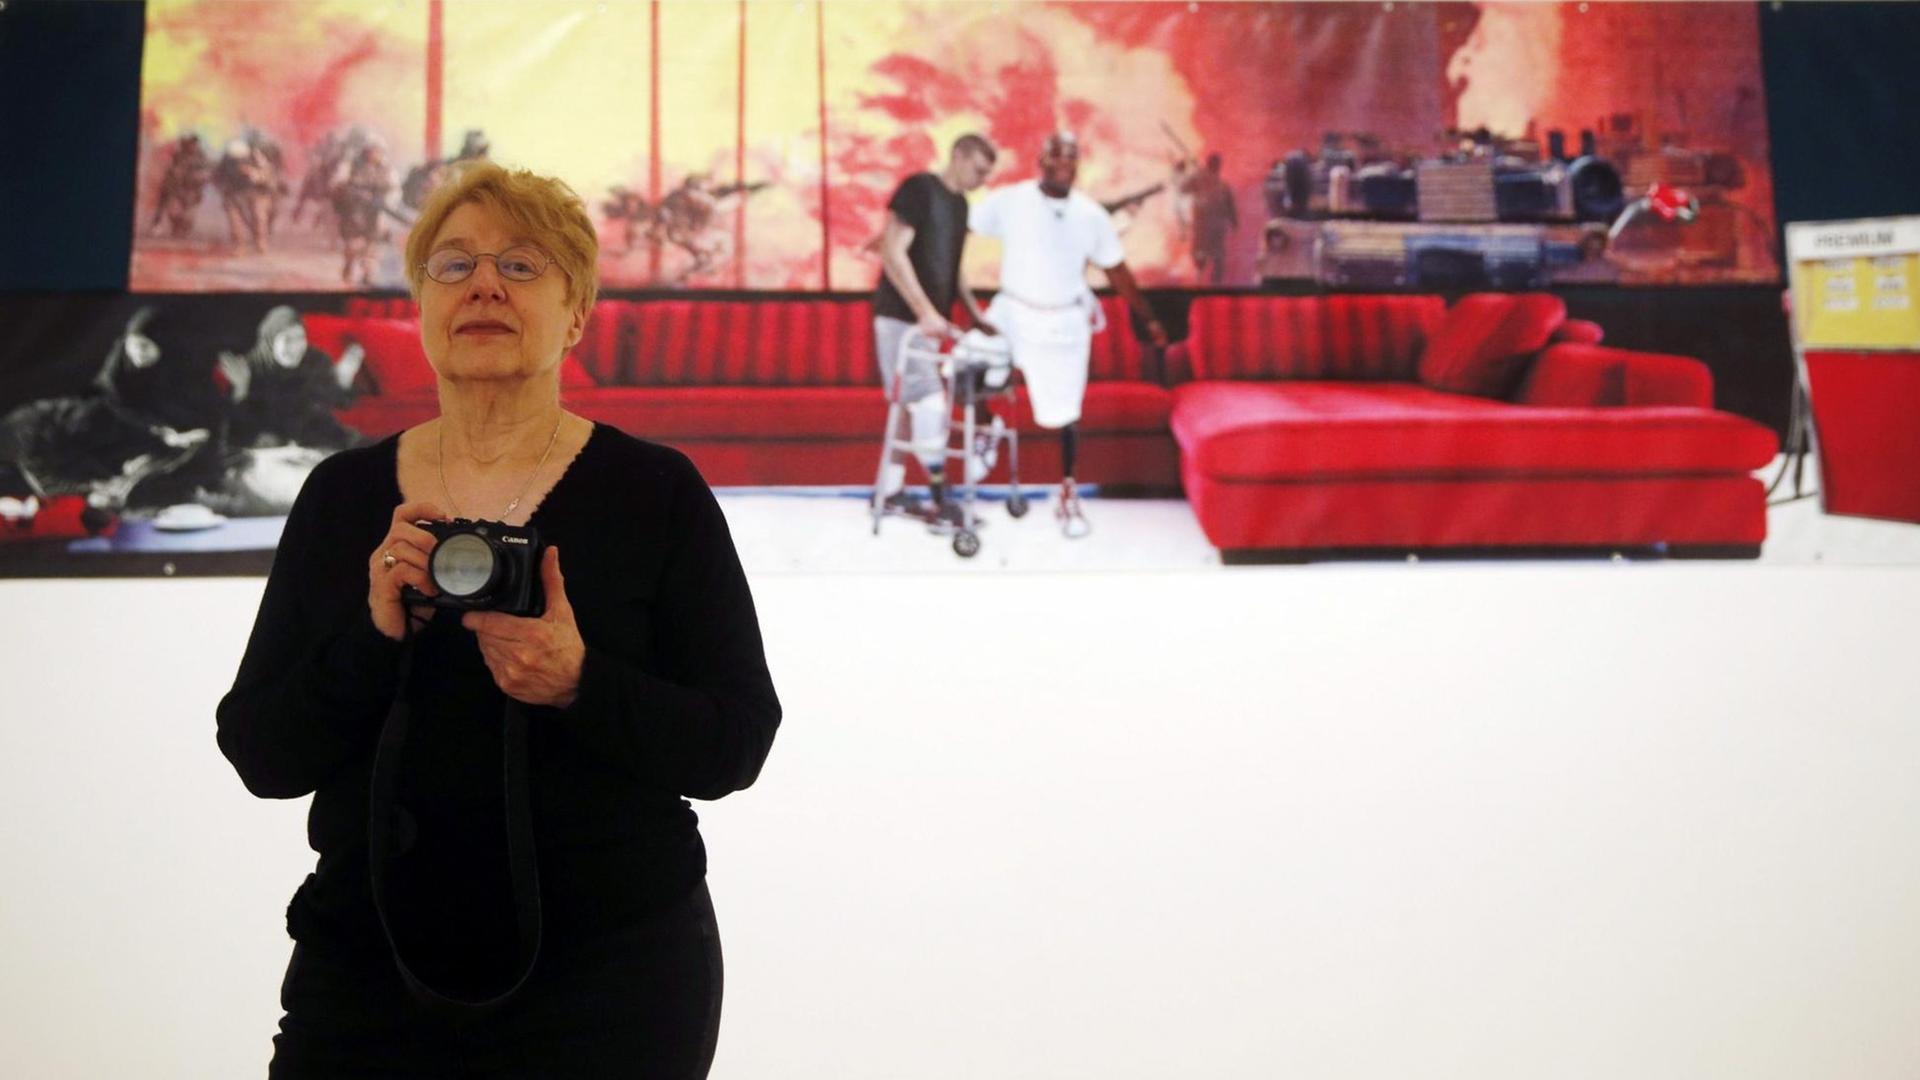 epa04603445 US artist Martha Rosler poses during the presentation of the exhibition called 'Woeful Weapons' at the Valencia Institute of Modern Art (IVAM), in Valencia, Spain, 04 February 2015. The display, running from 05 February to 05 July, seeks to contrast Spanish artist Josep Renau's view of various conflicts with the perspective that Martha Rosler developed in relation to Vietnam and Iraq in the 1960s and in the last decade, respectively. EPA/KAI FOERSTERLING |